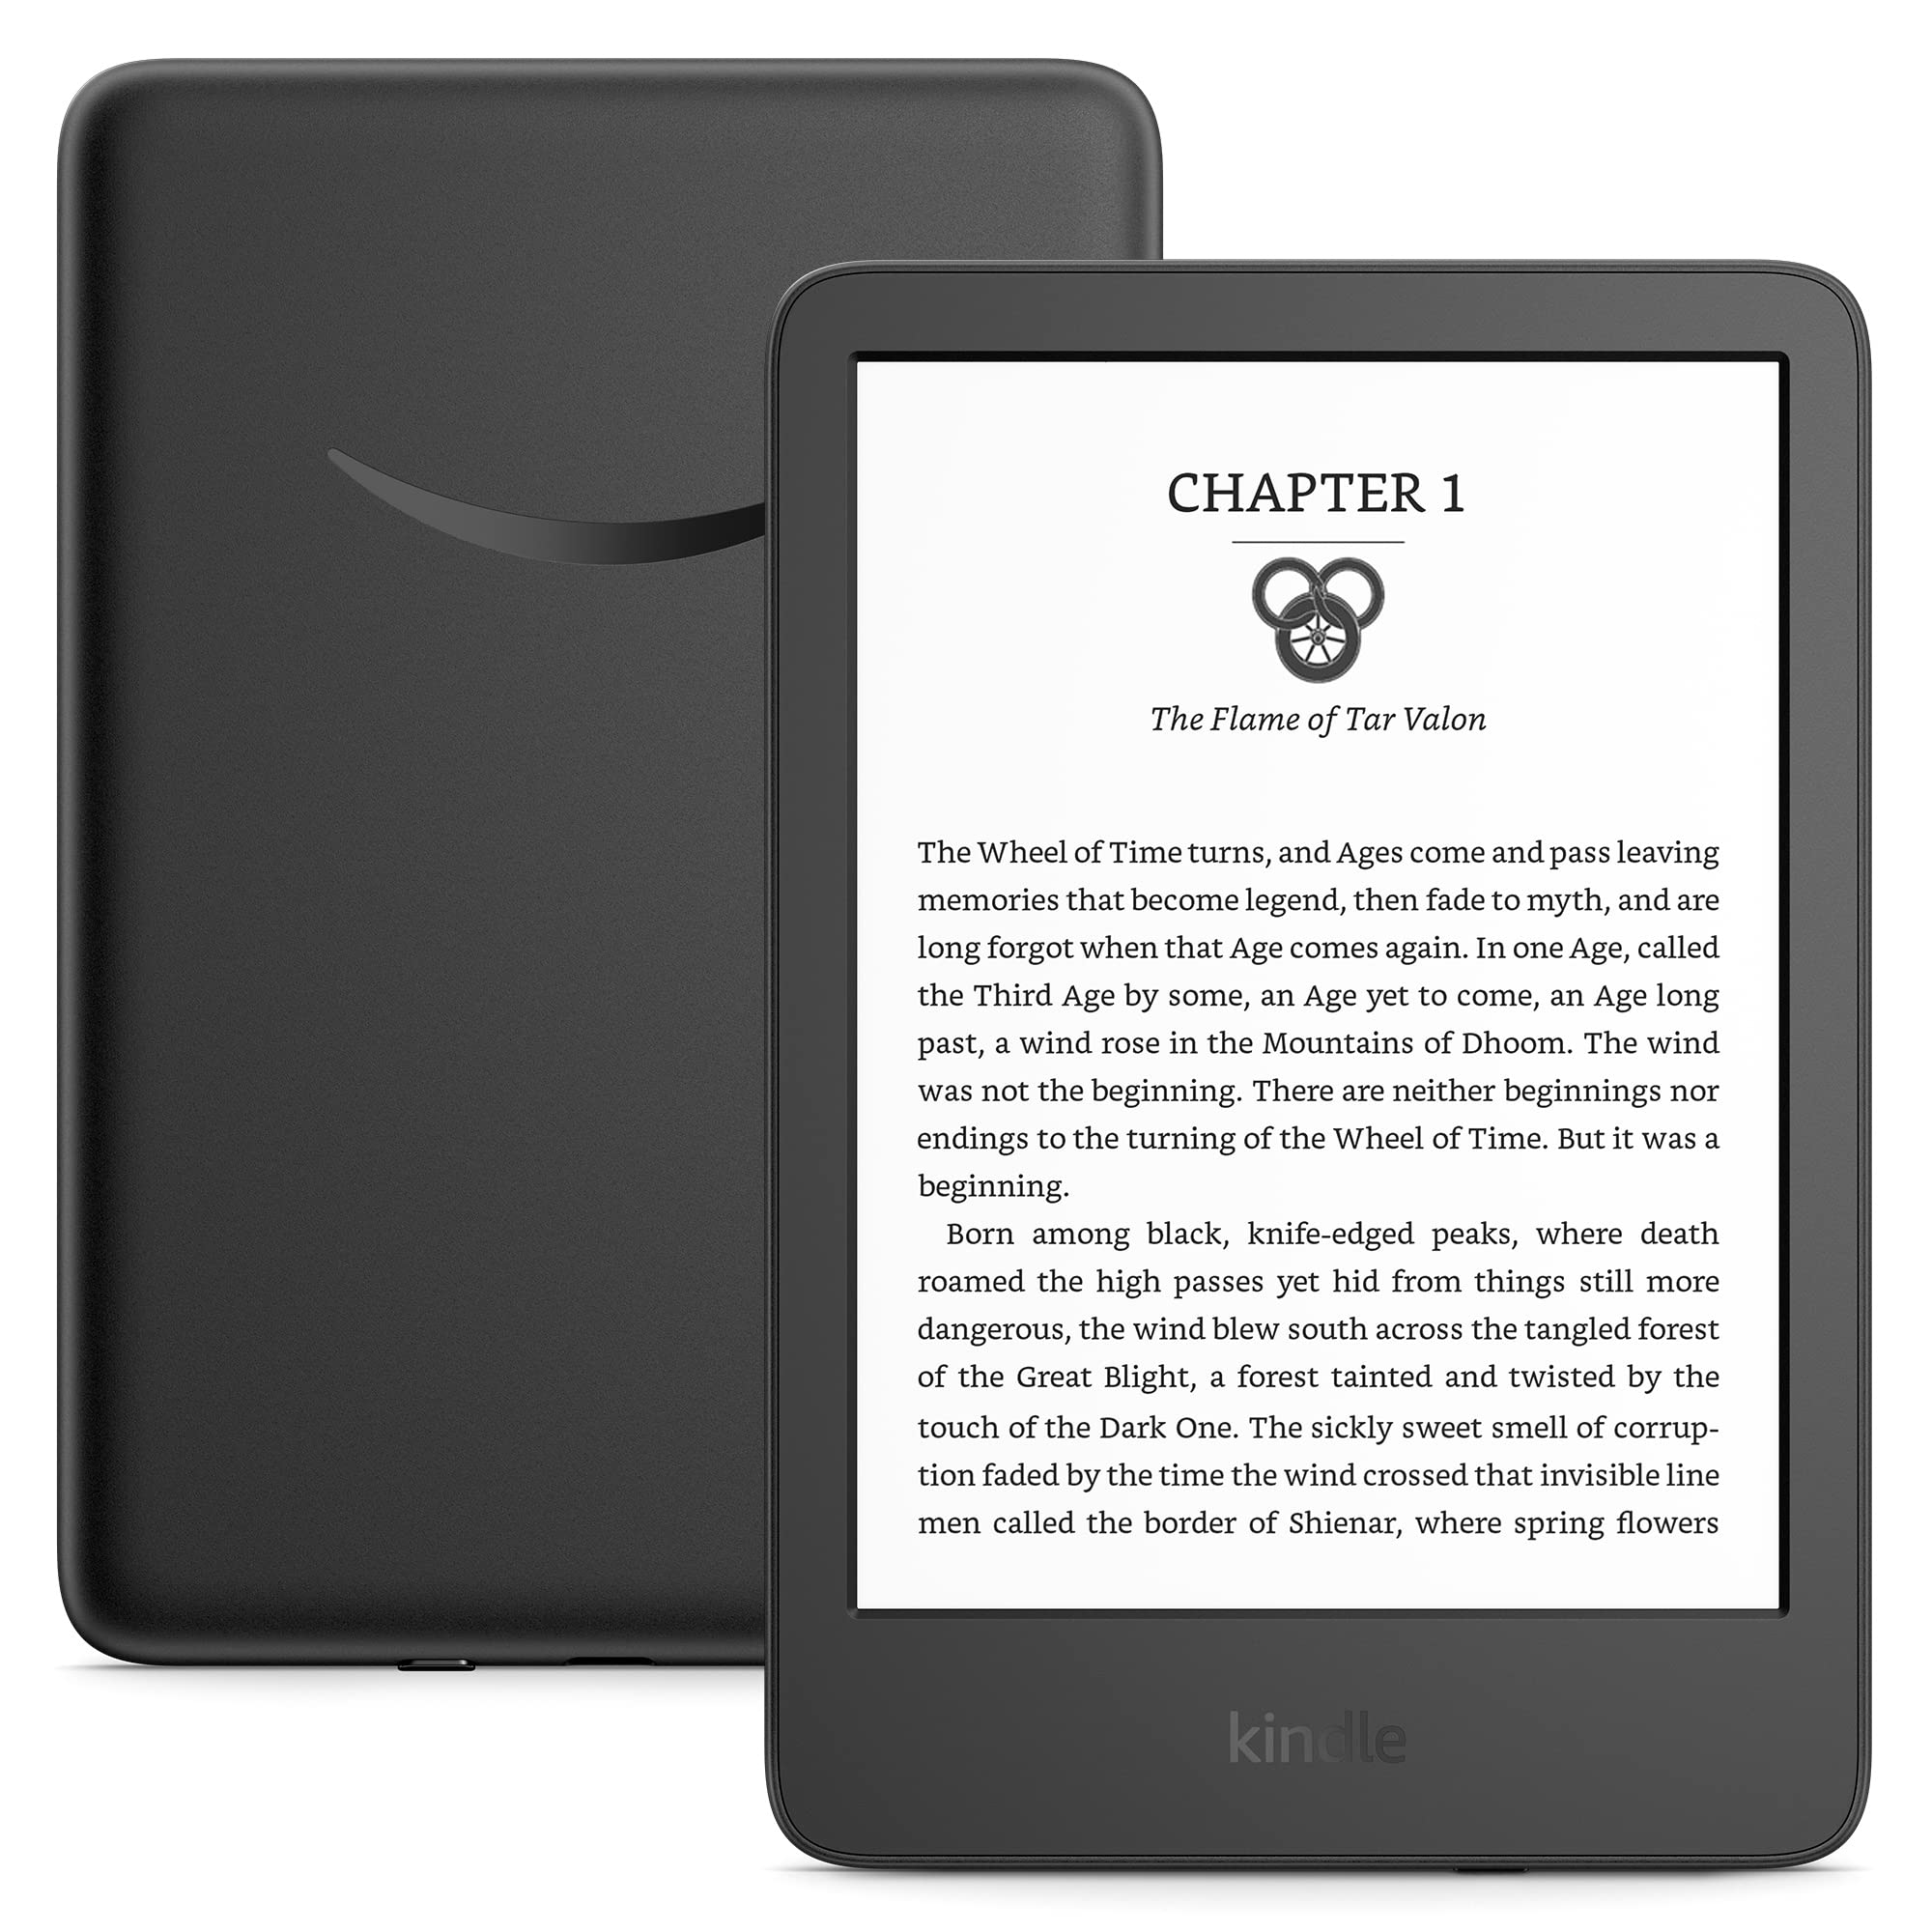 All-new Kindle (2022 release) - The lightest and most compact Kindle, now with a 6” 300 ppi high-resolution display, and 2x the storage - Black